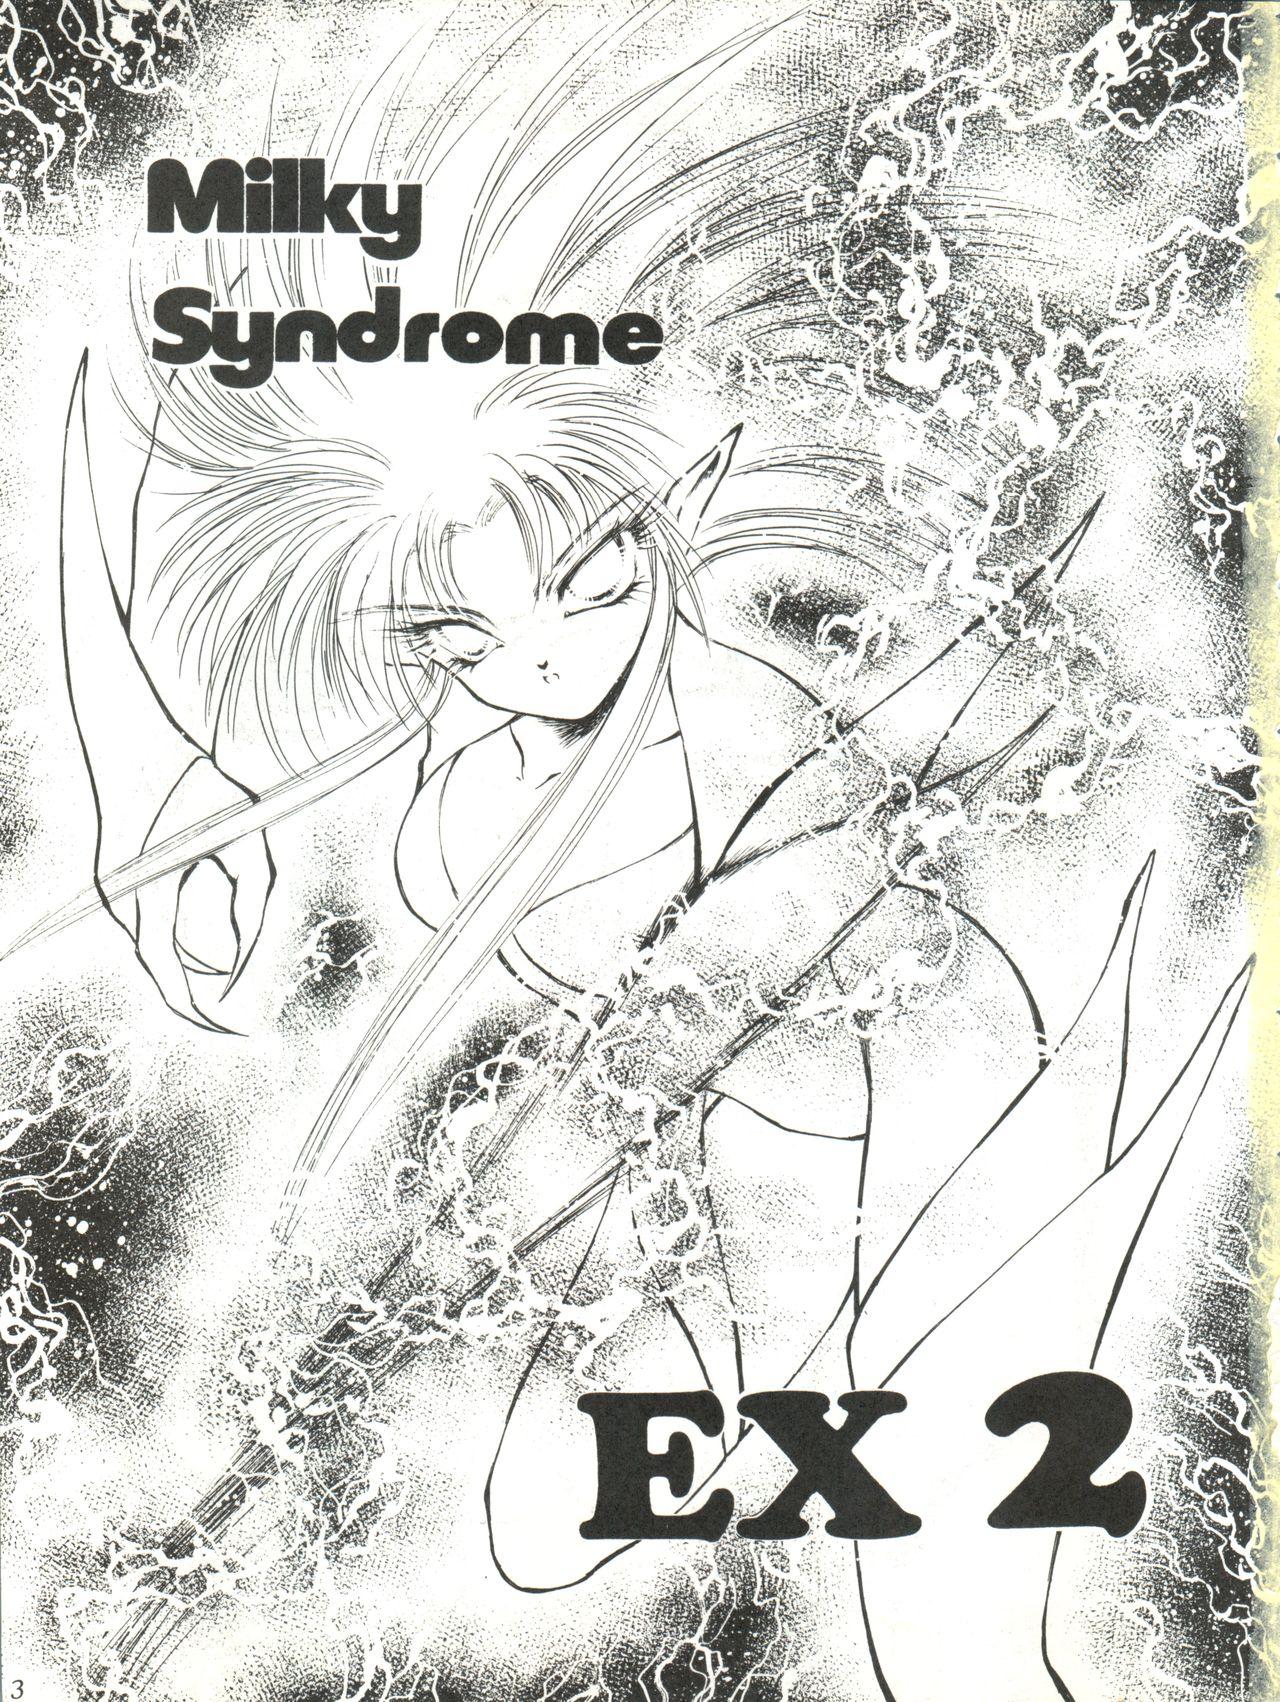 Women Sucking Milky Syndrome EX 2 - Sailor moon Tenchi muyo Pretty sammy Ghost sweeper mikami Ng knight lamune and 40 Old - Page 3